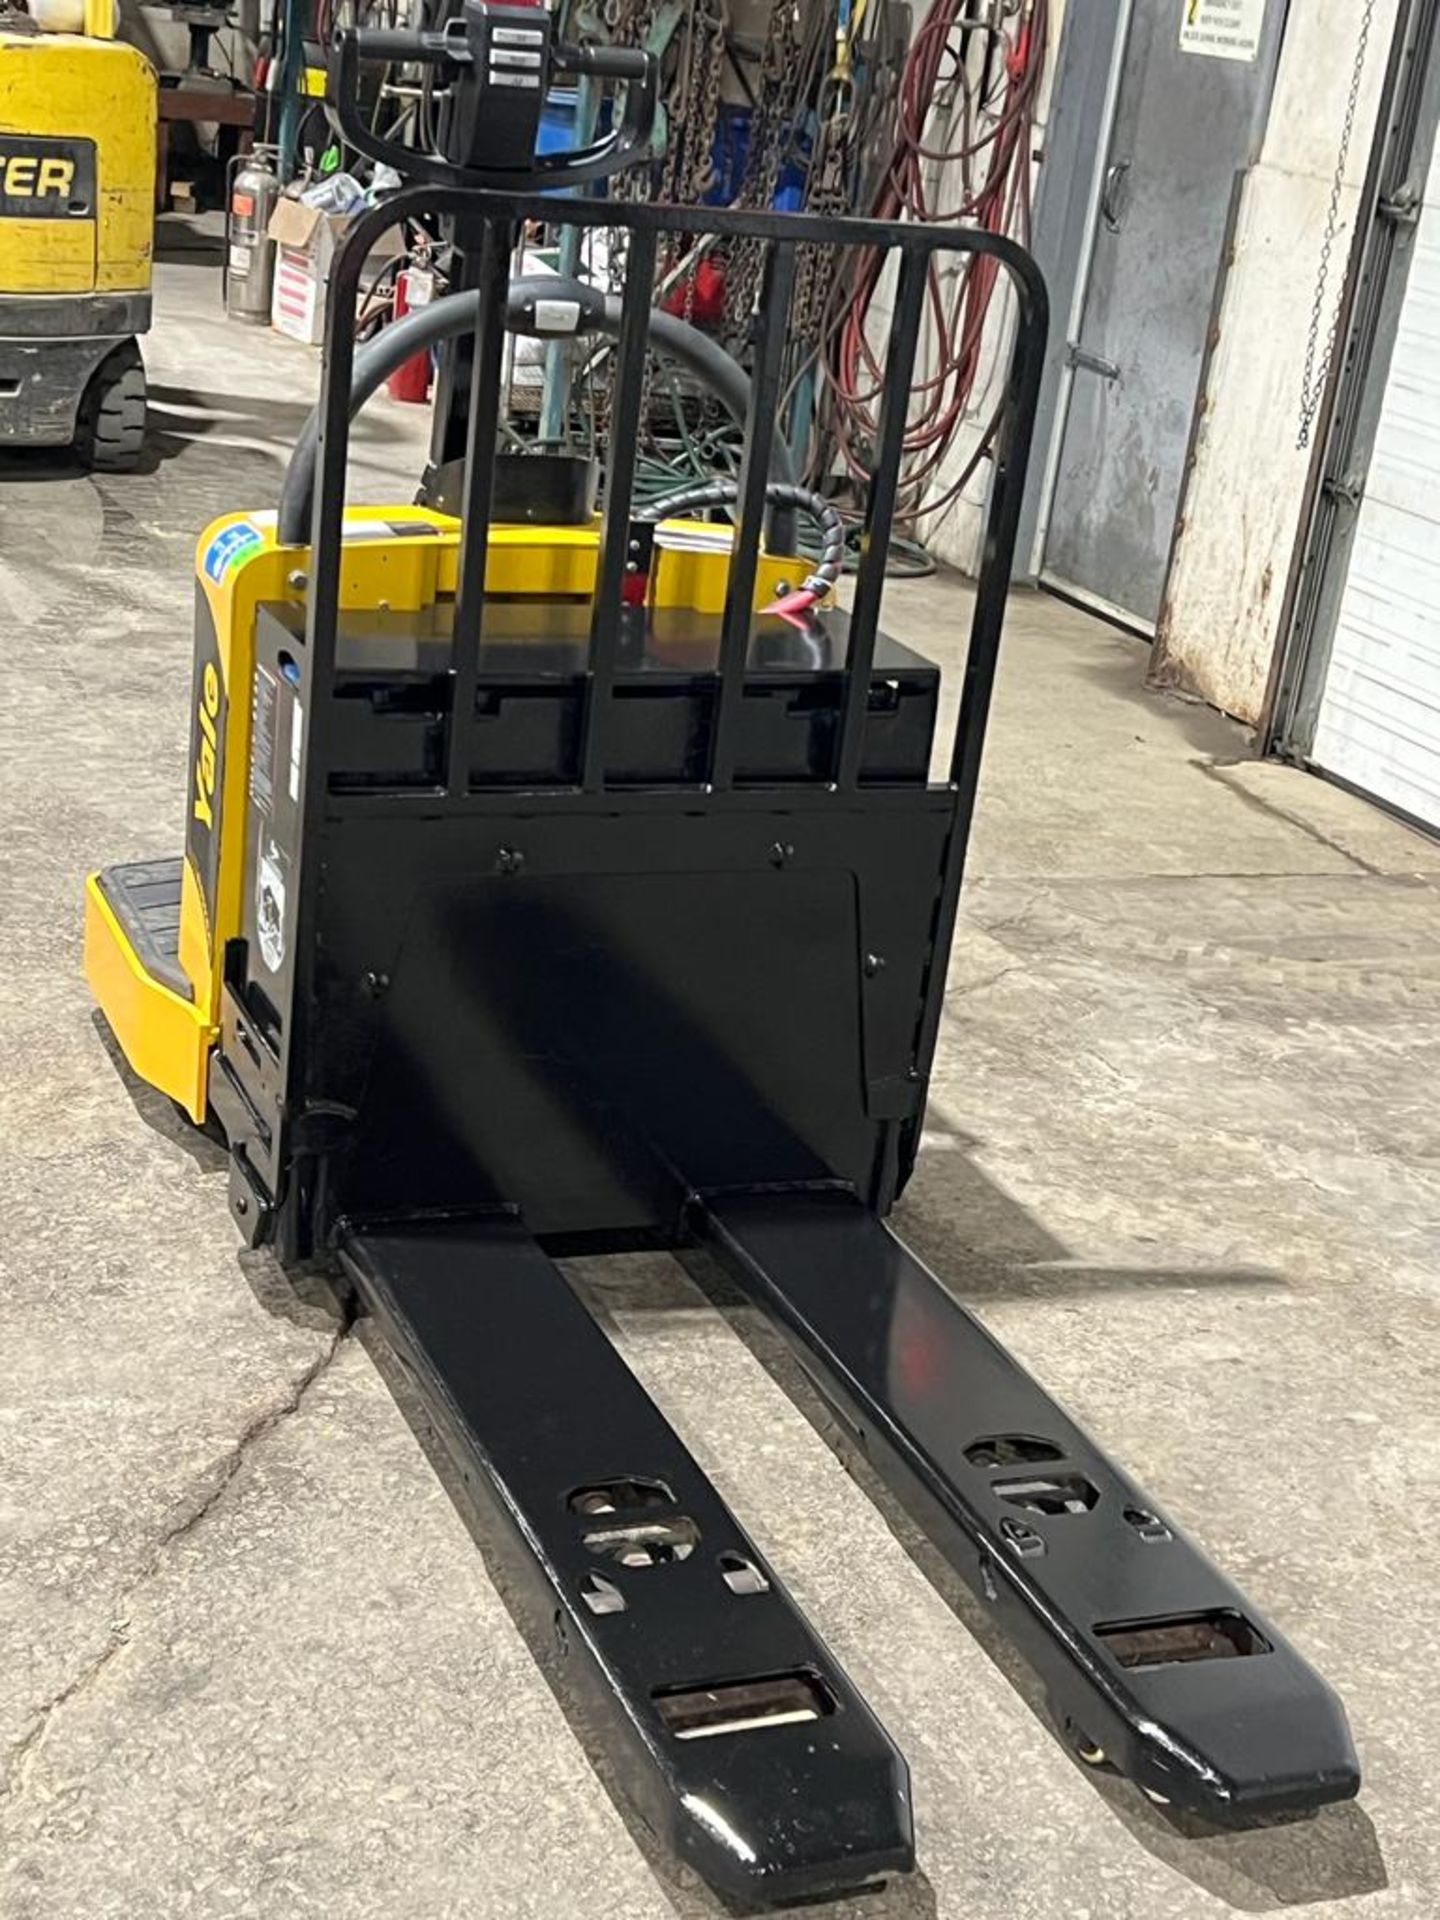 2016 Yale RIDE ON 6000lbs capacity Powered Pallet Cart 24V BATTERY POWER STEERING Lift - Ride on - Image 2 of 3